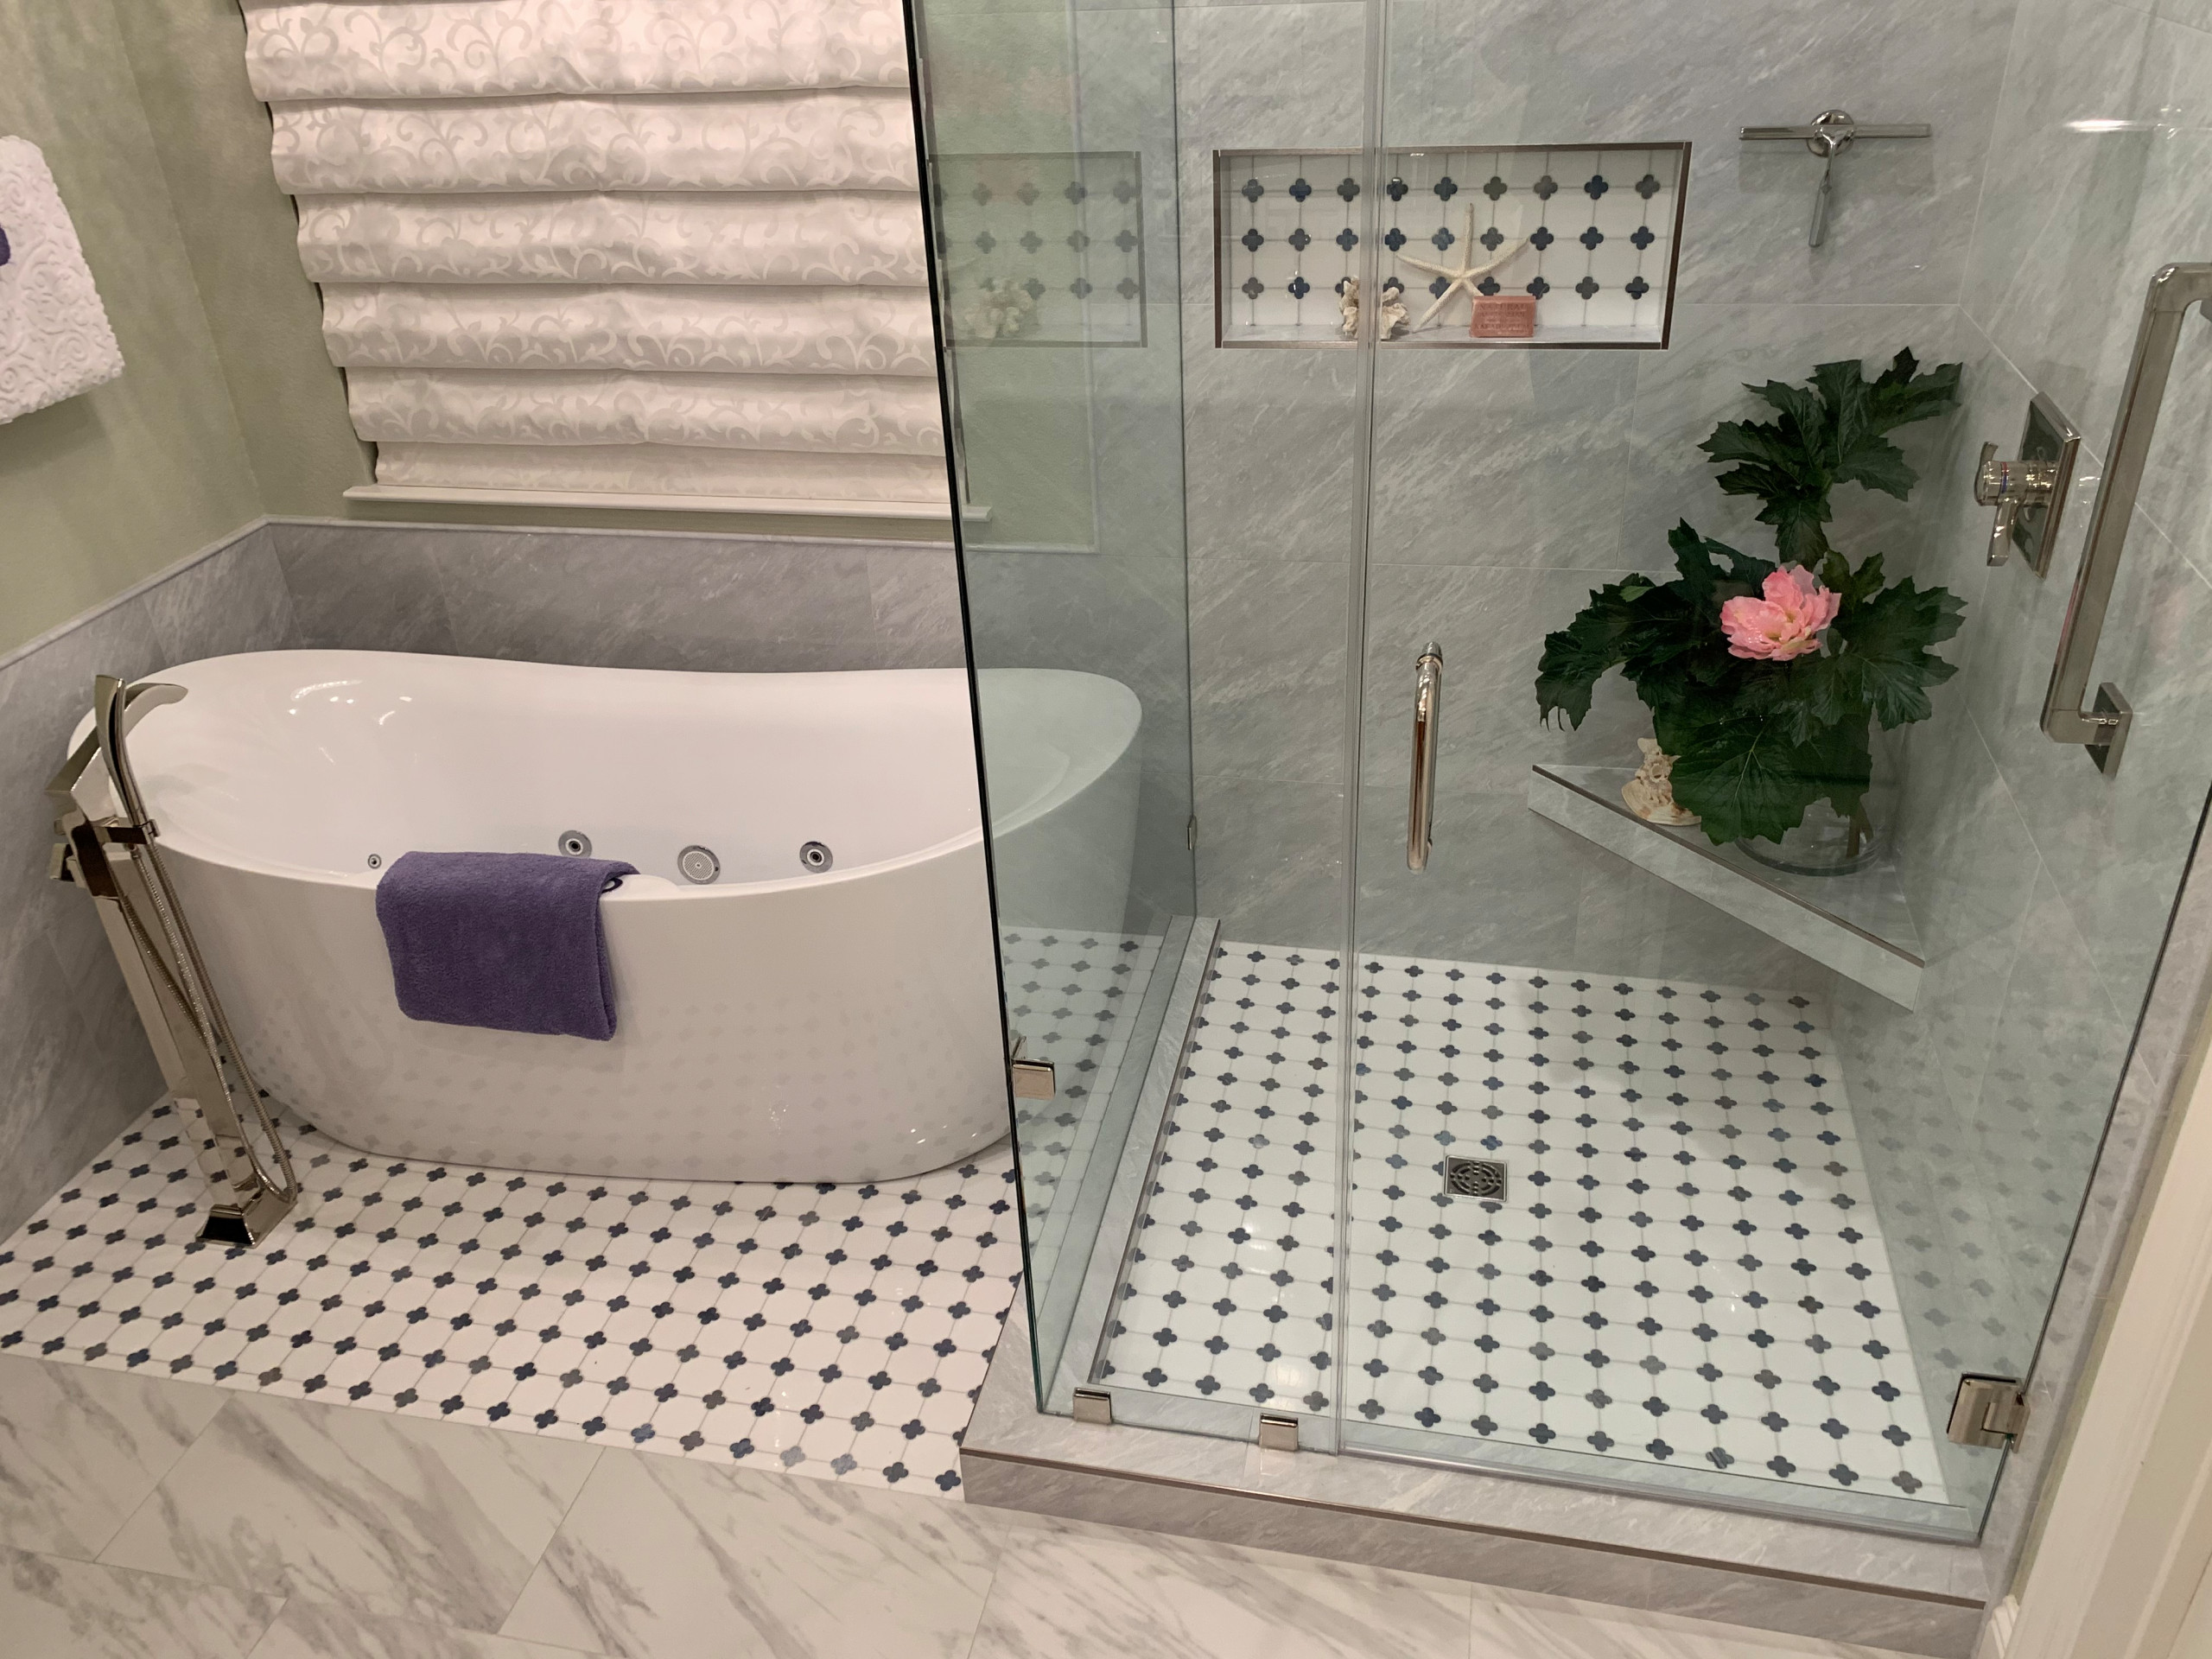 UPDATED TUB & SHOWER COMBINATION